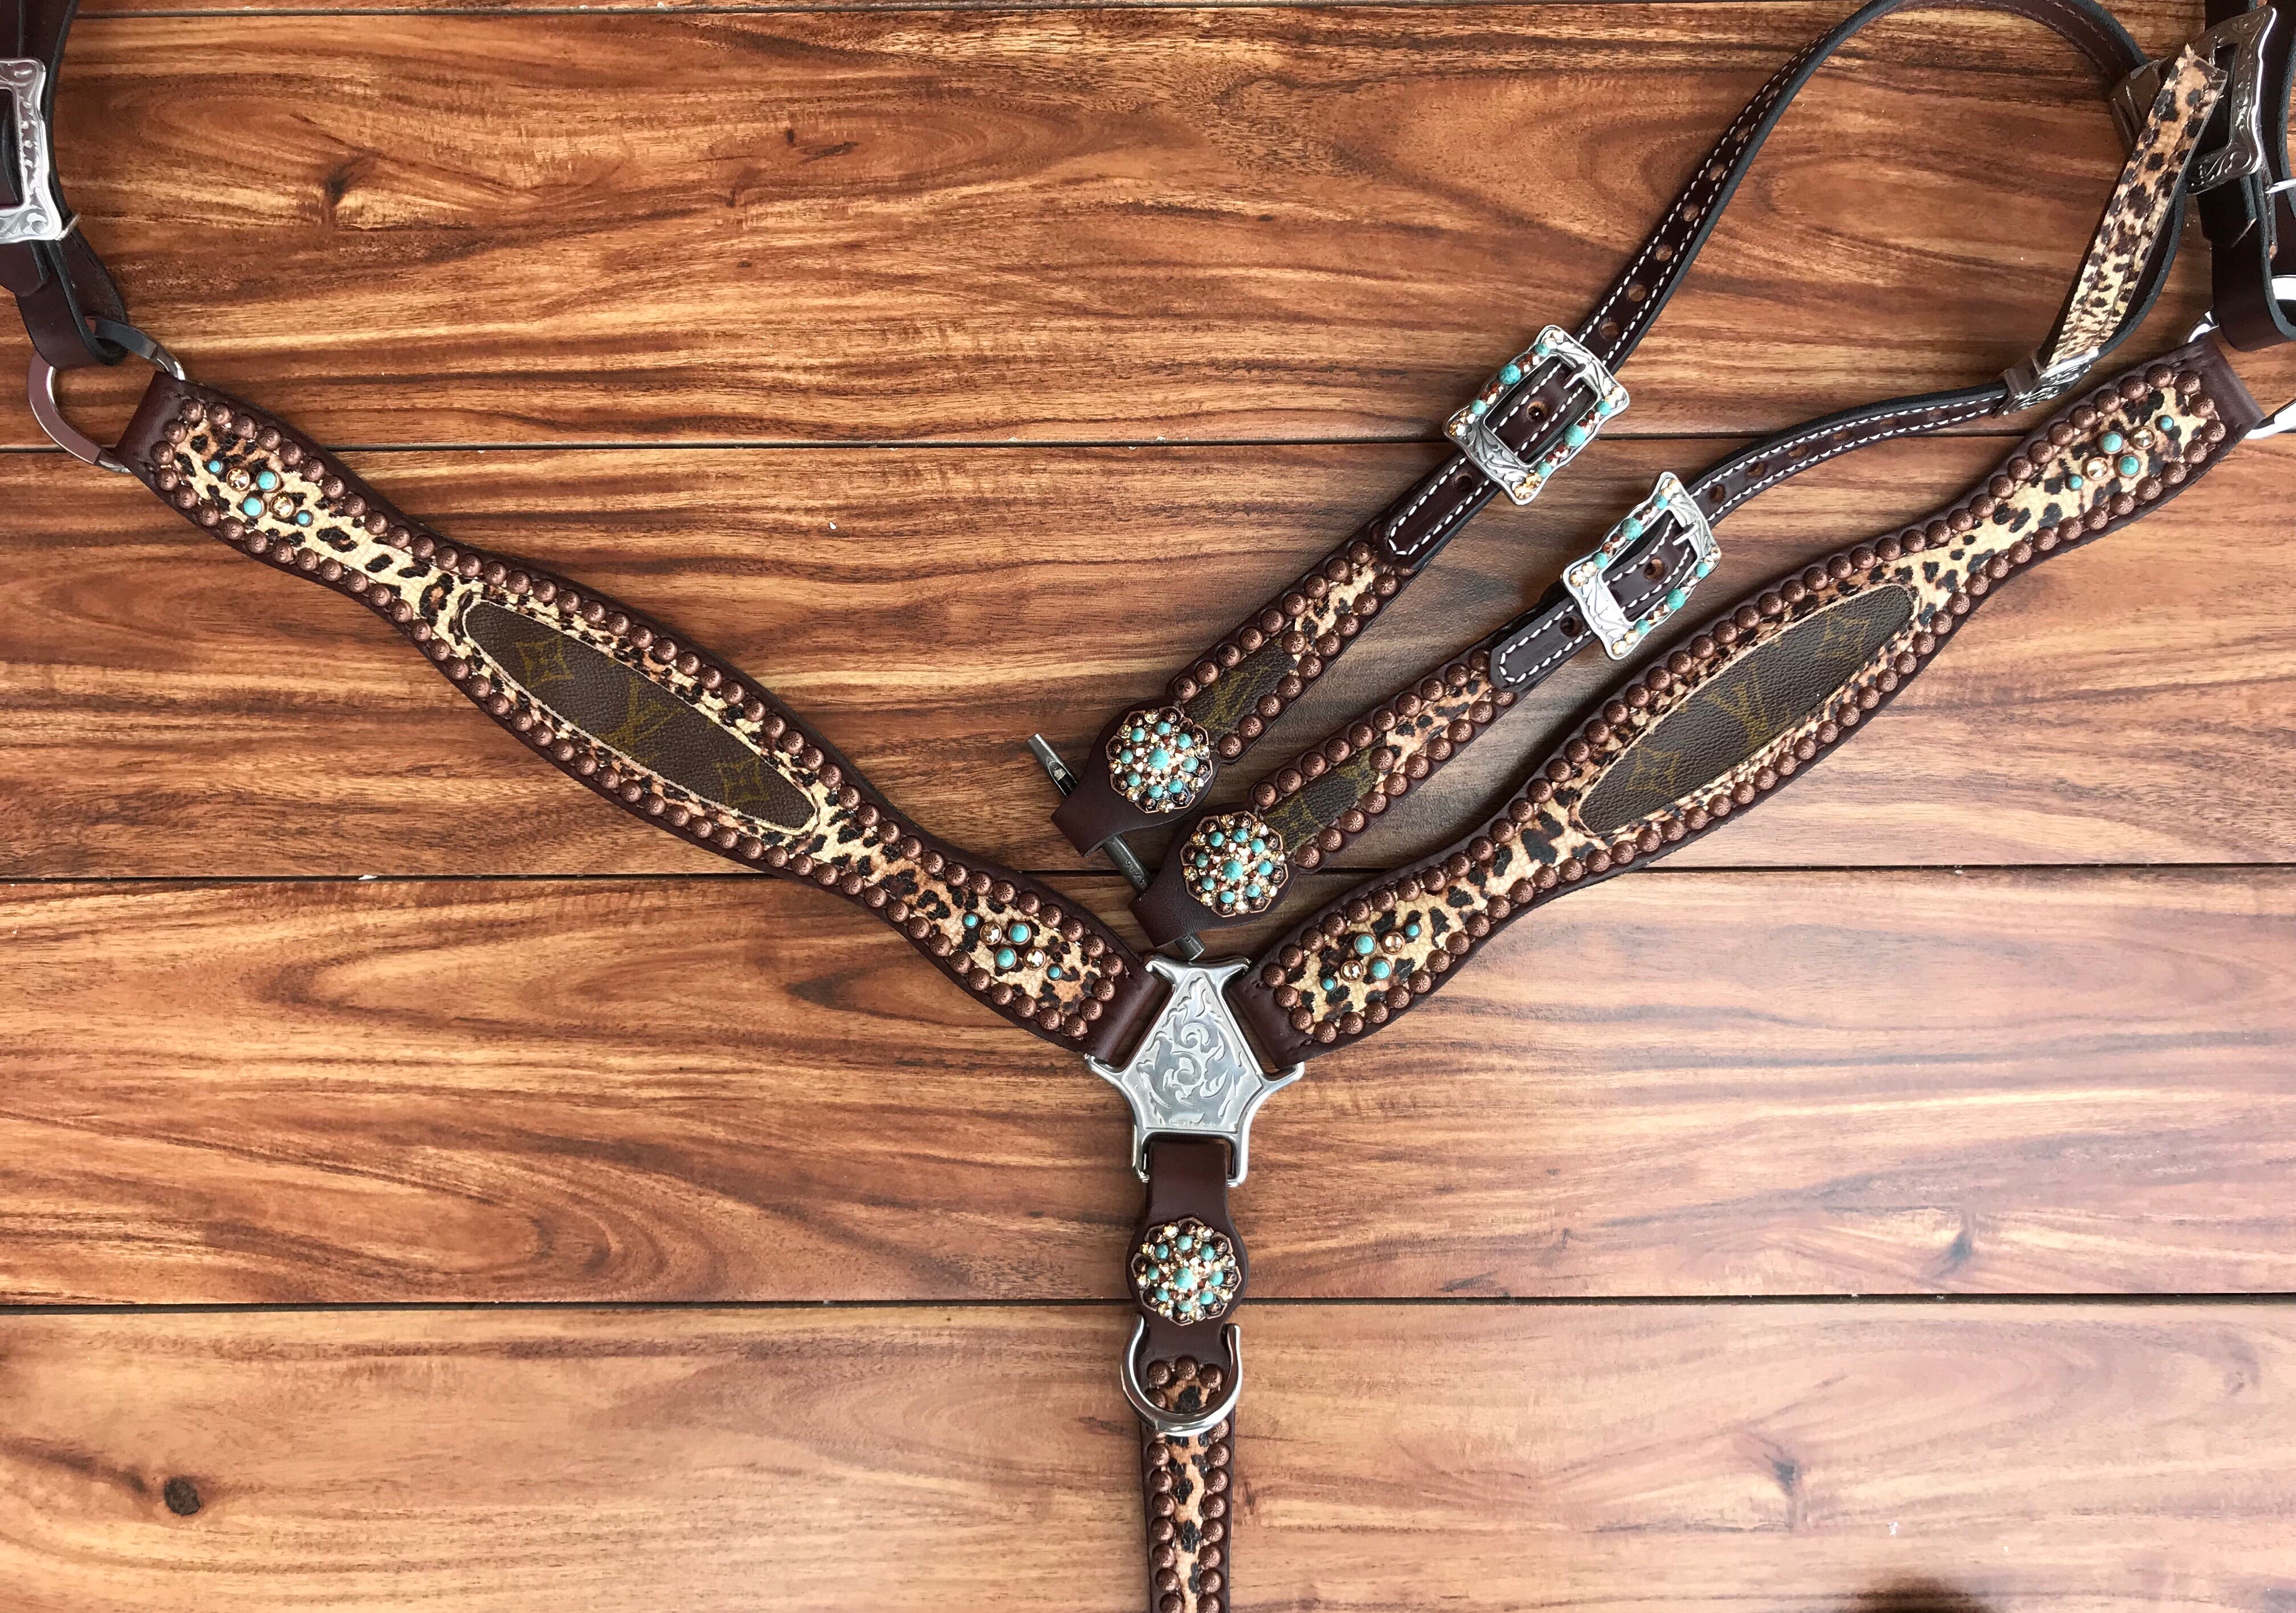 Authentic Re-purposed Louis Vuitton headstall and breast collar